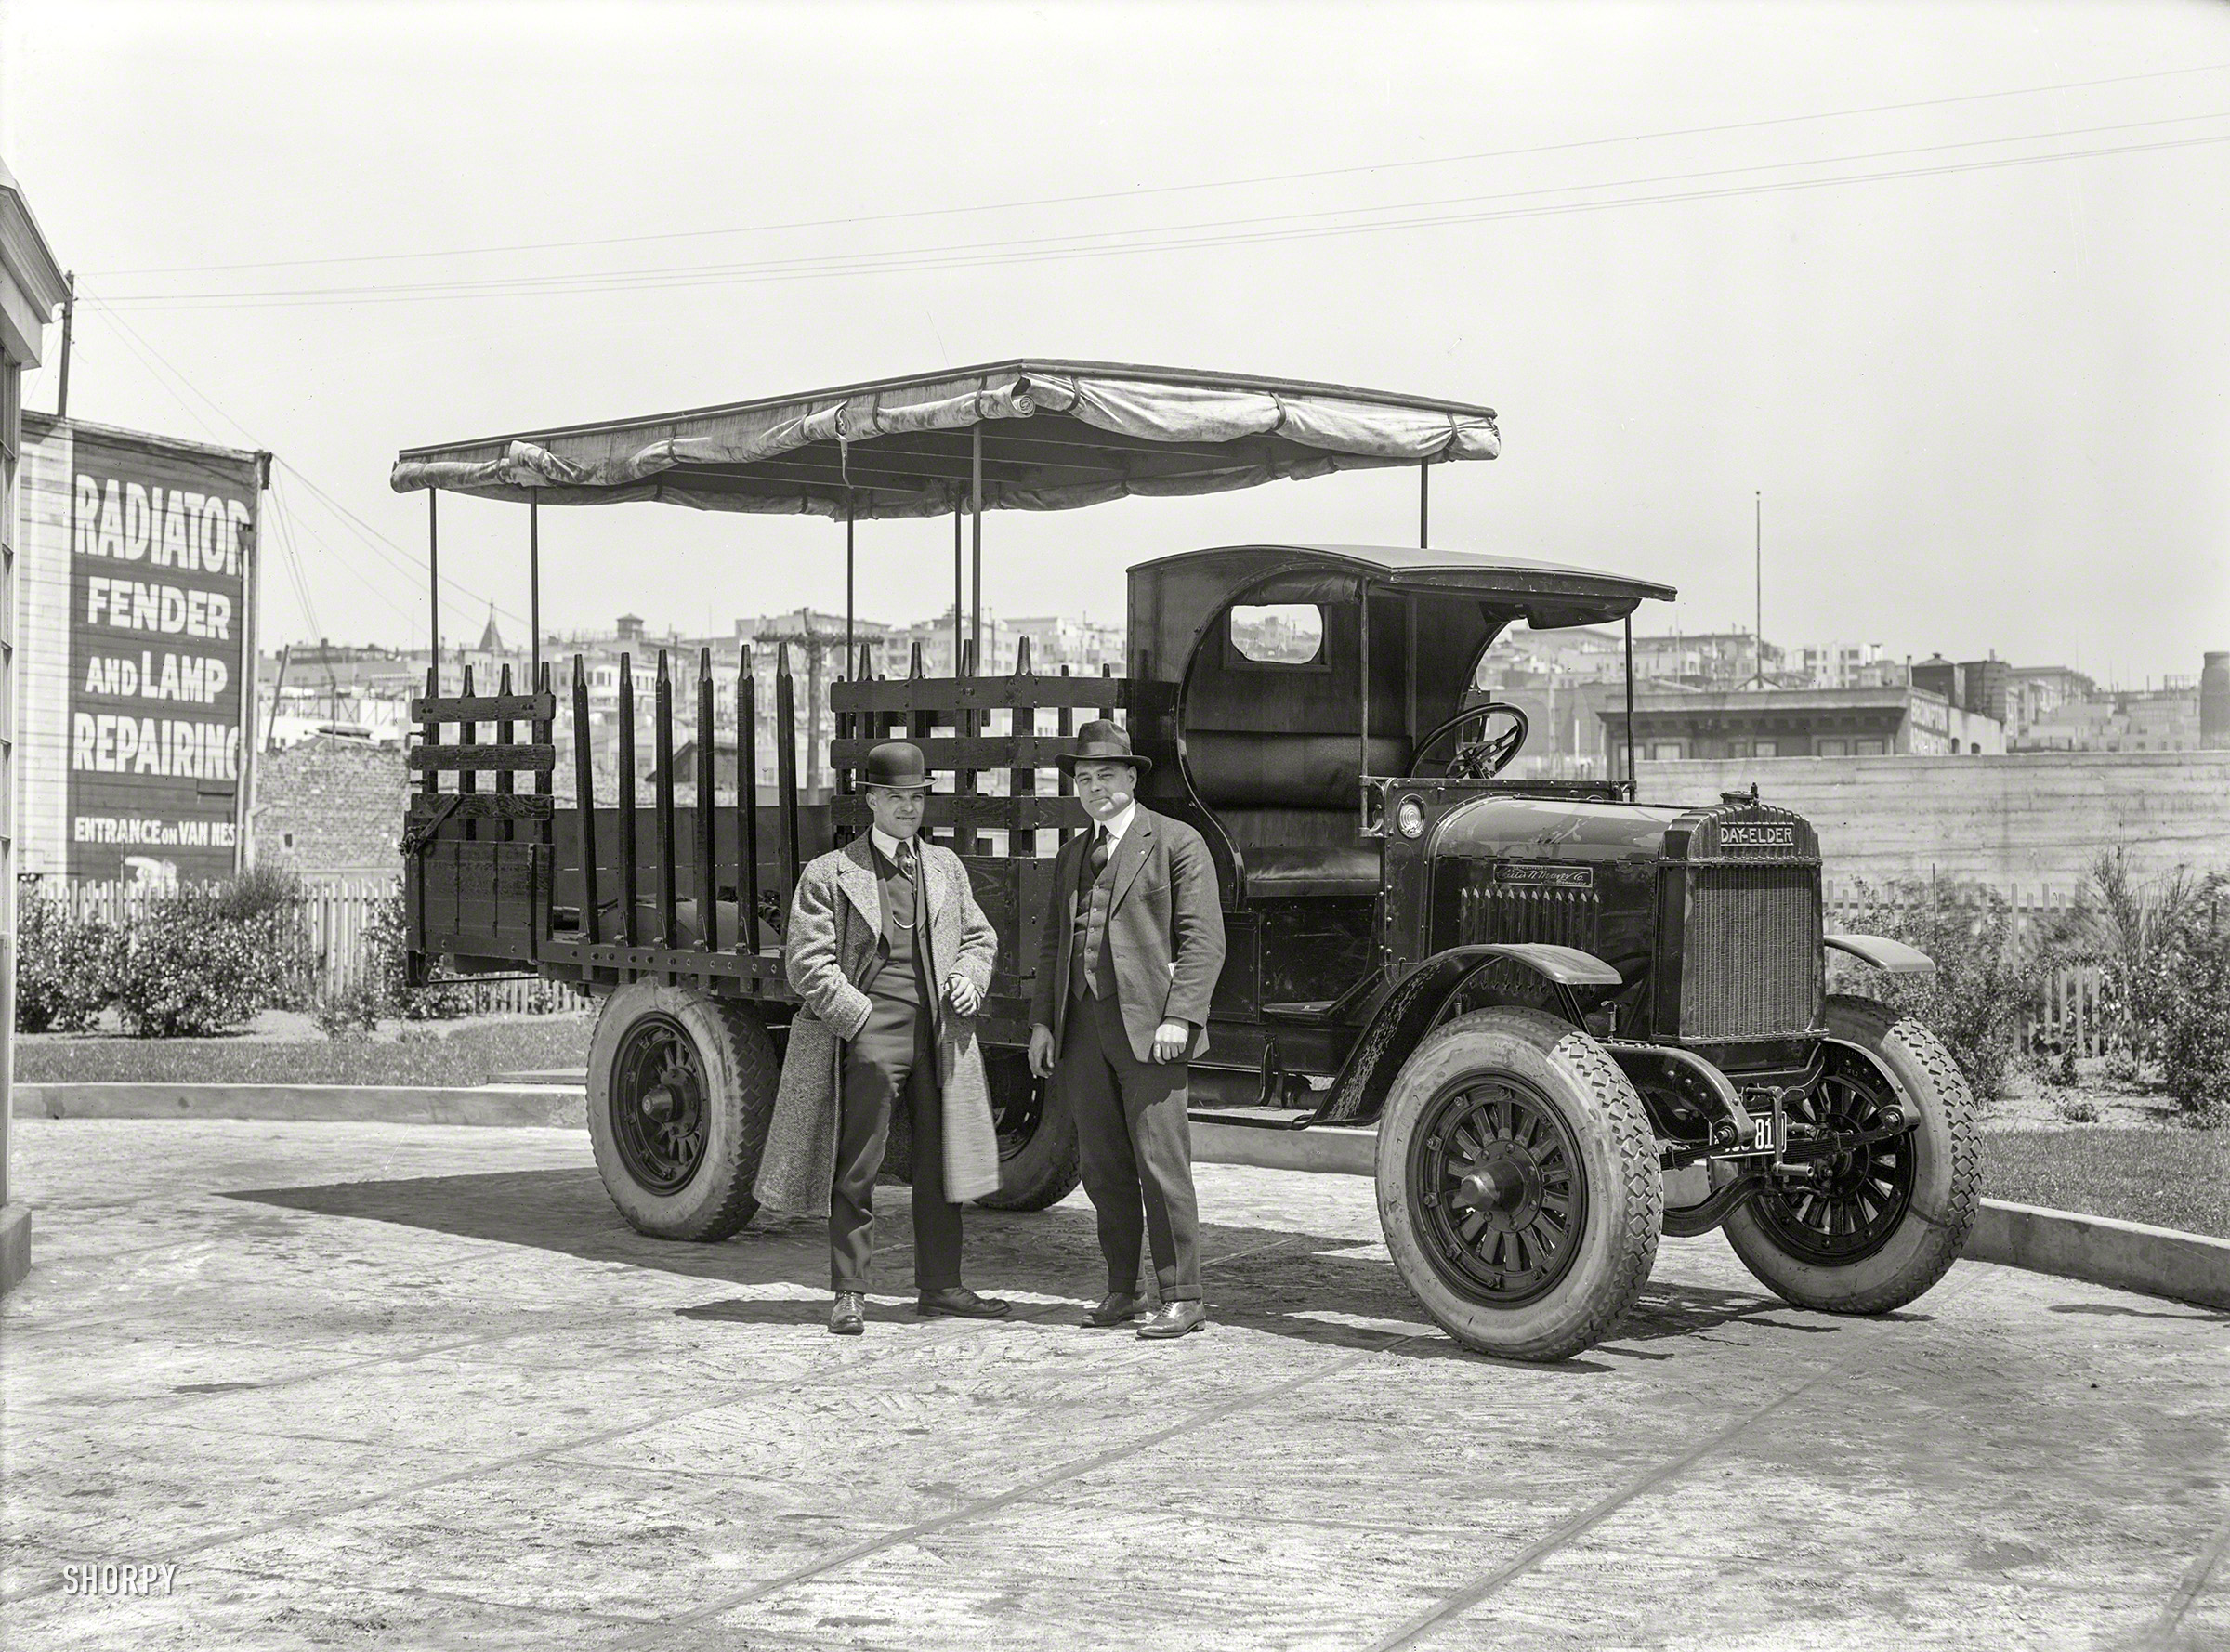 San Francisco circa 1920. "Day-Elder truck." Latest entry on the Shorpy List of Lapsed Lorries. 5x7 glass negative by Christopher Helin. View full size.